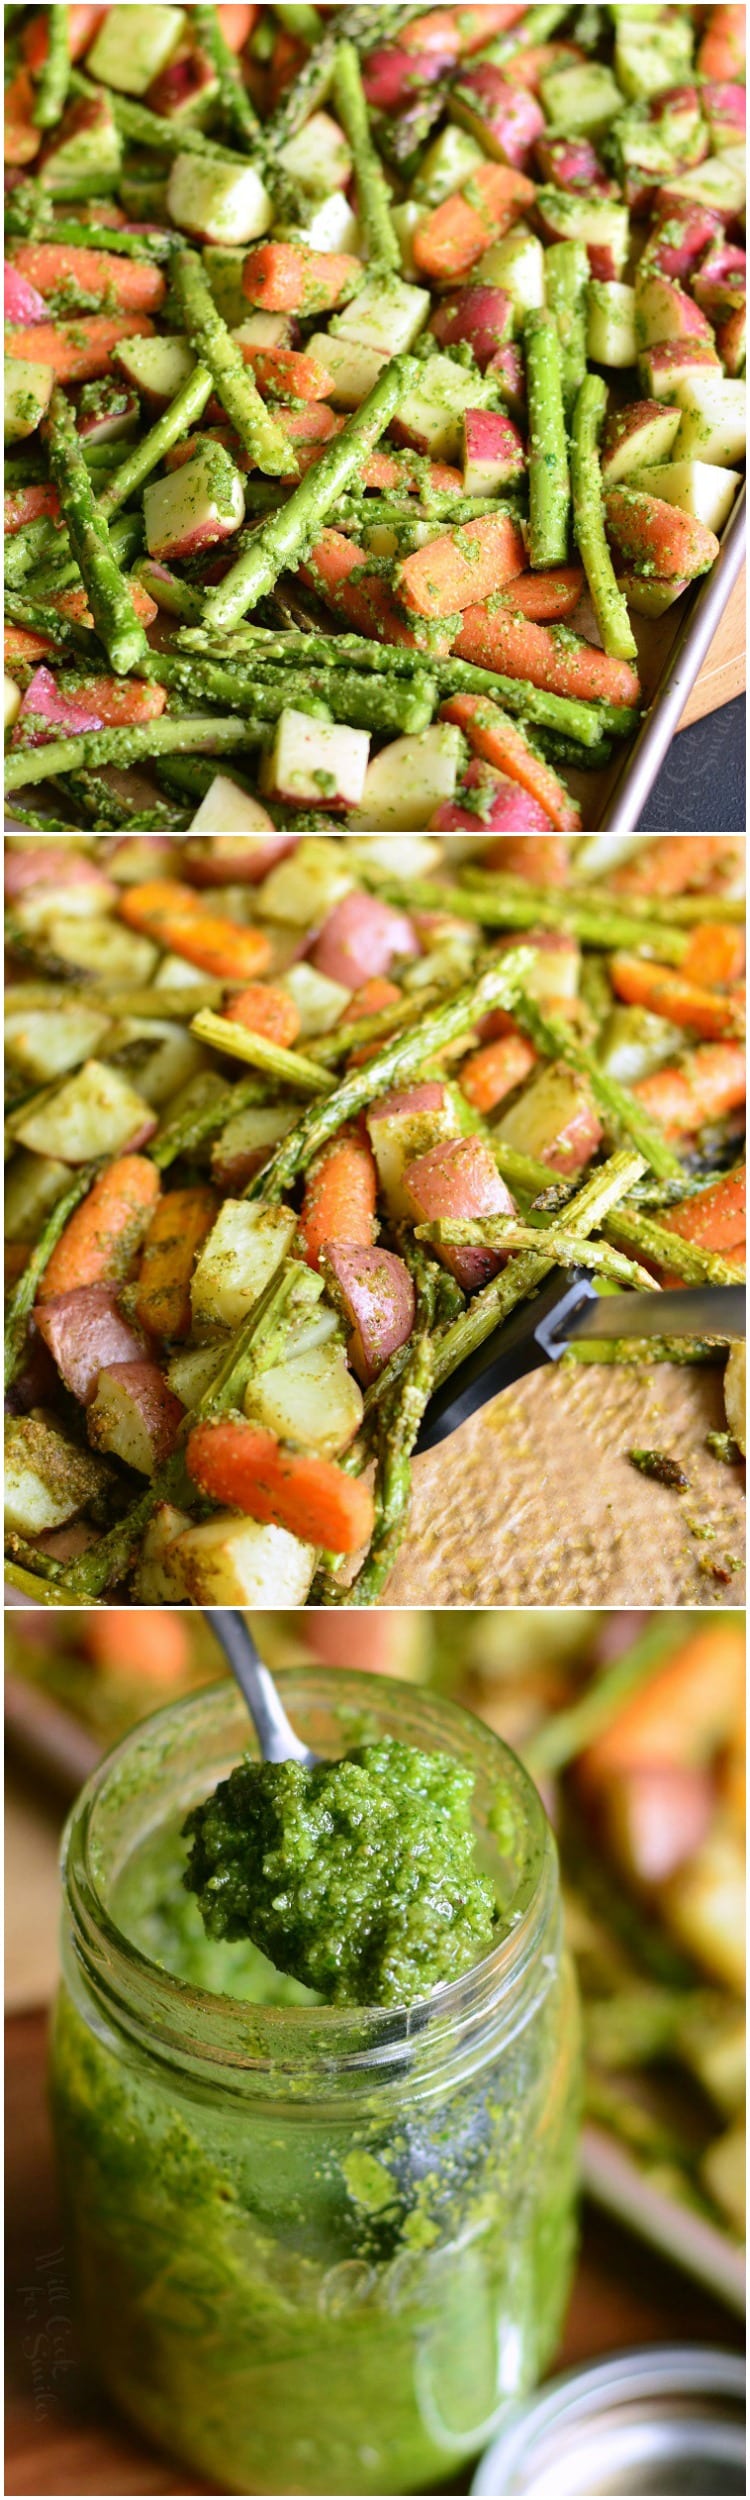 Pesto Roasted Potatoes Carrots and Asparagus collage 